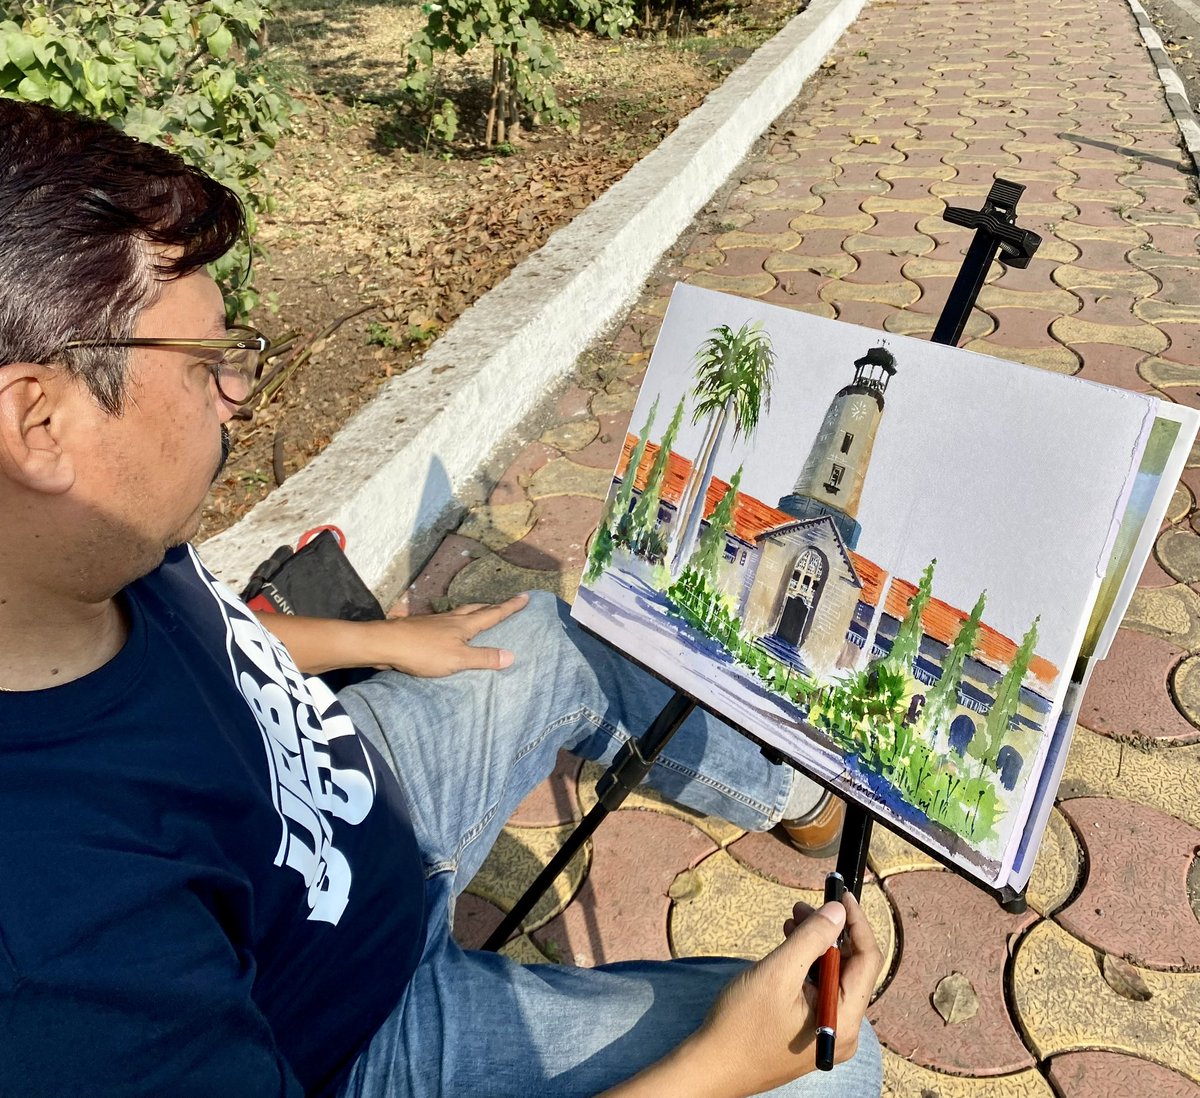 Thanks to #CMEPune and #Urbansketcherspune for hosting this event. Overwhelming experience indeed!